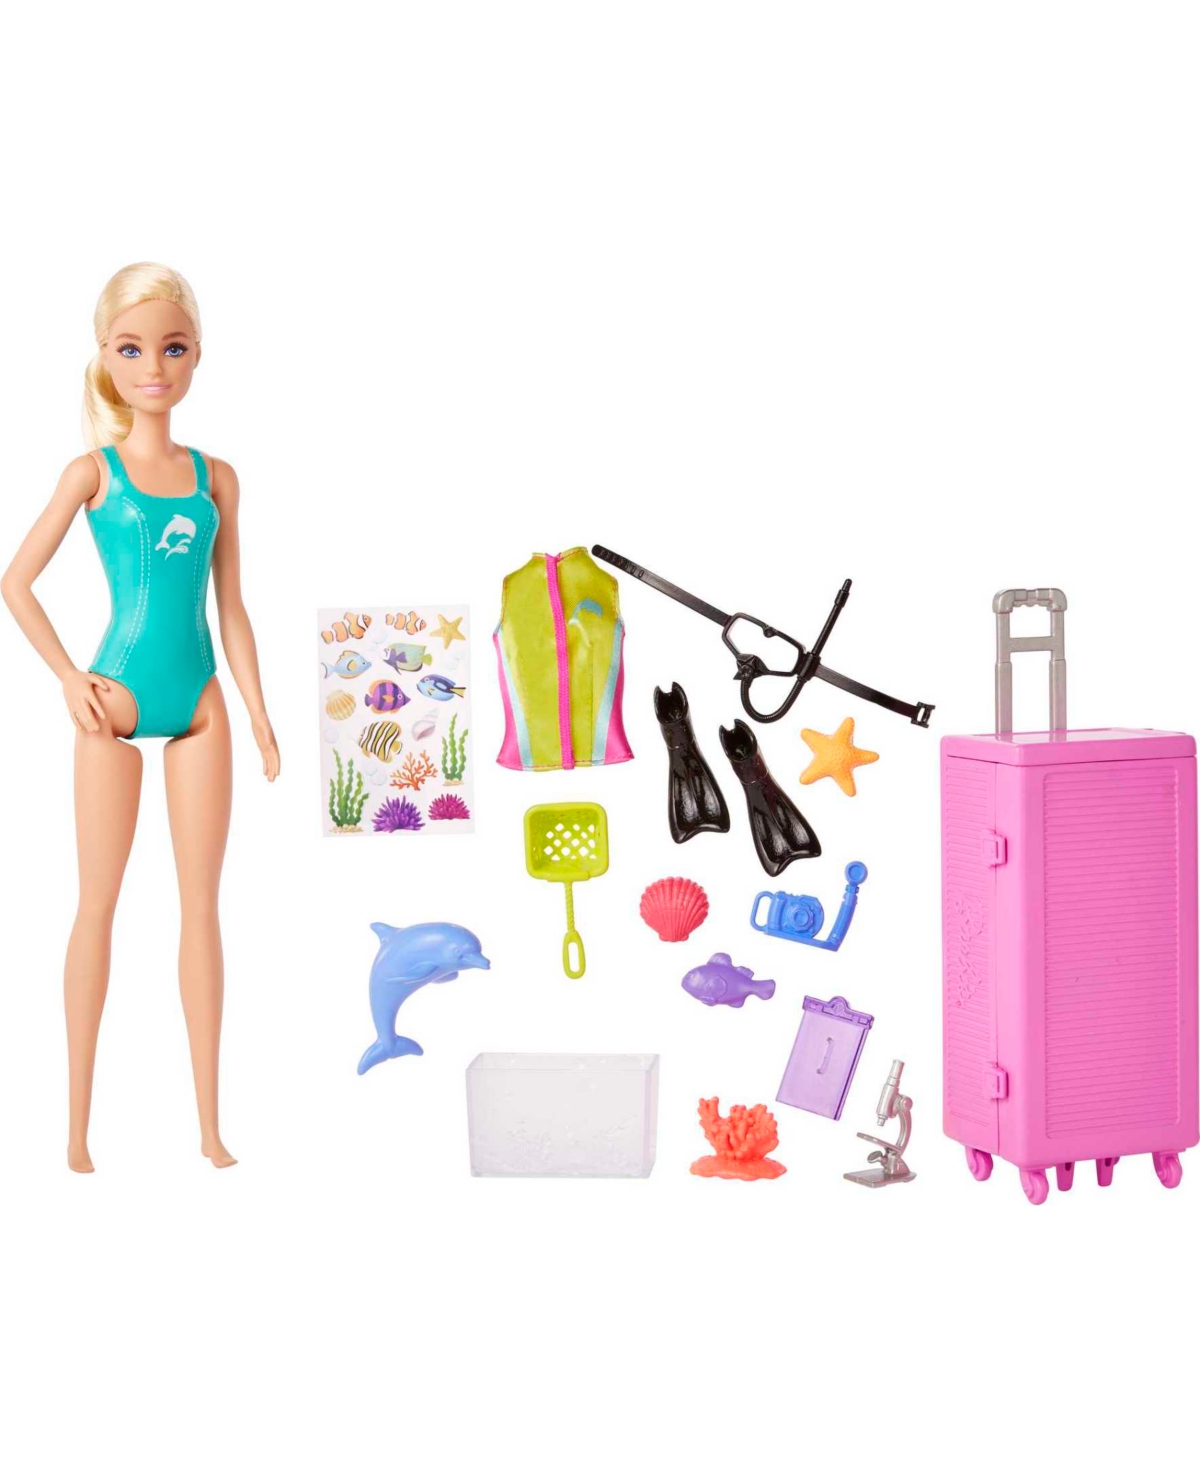 Barbie Marine Biologist Doll & Playset (Blonde, Multi-Color) $11.43 + Free Store P/U at Macy's or F/S on $25+